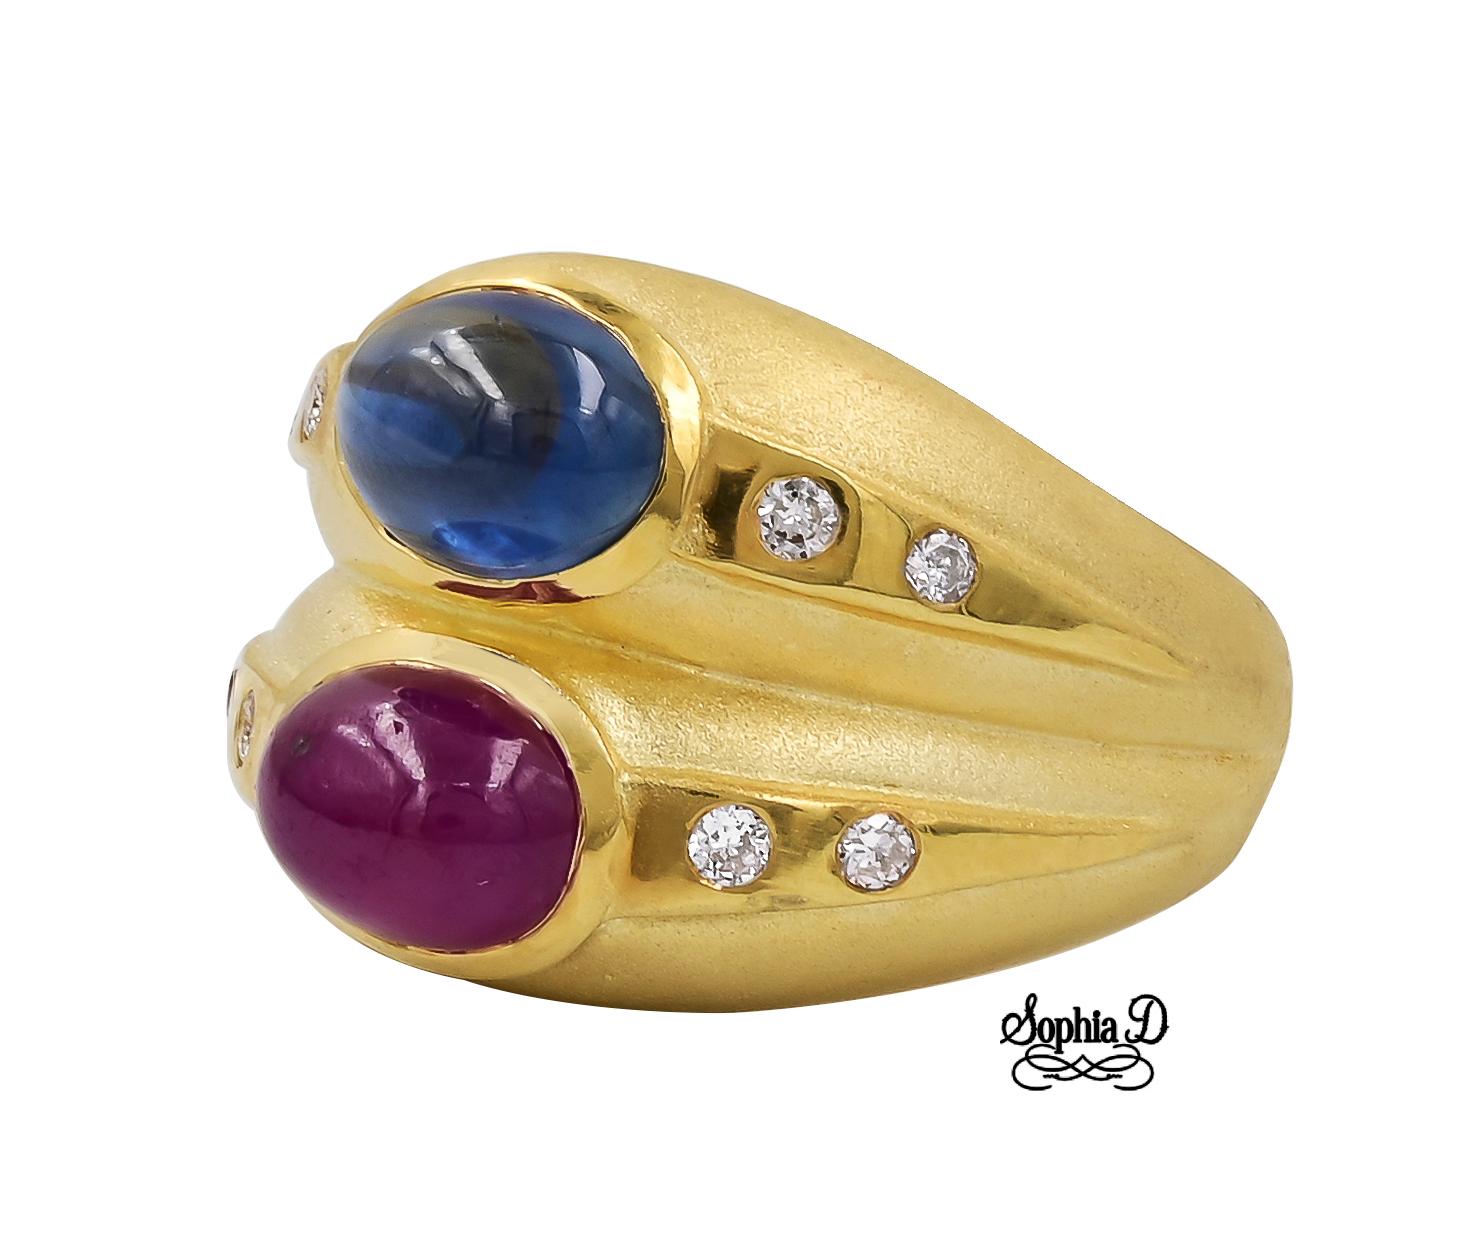 18K yellow gold ring with blue sapphire and ruby.

Sophia D by Joseph Dardashti LTD has been known worldwide for 35 years and are inspired by classic Art Deco design that merges with modern manufacturing techniques.  